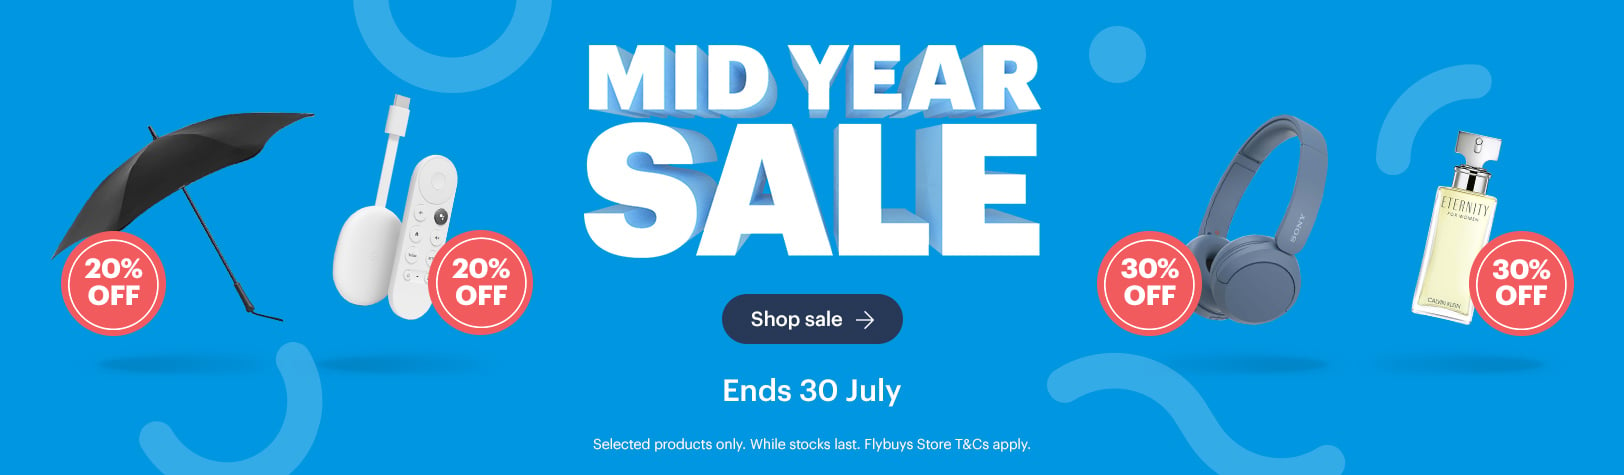 Mid Year Sale ends 30 July